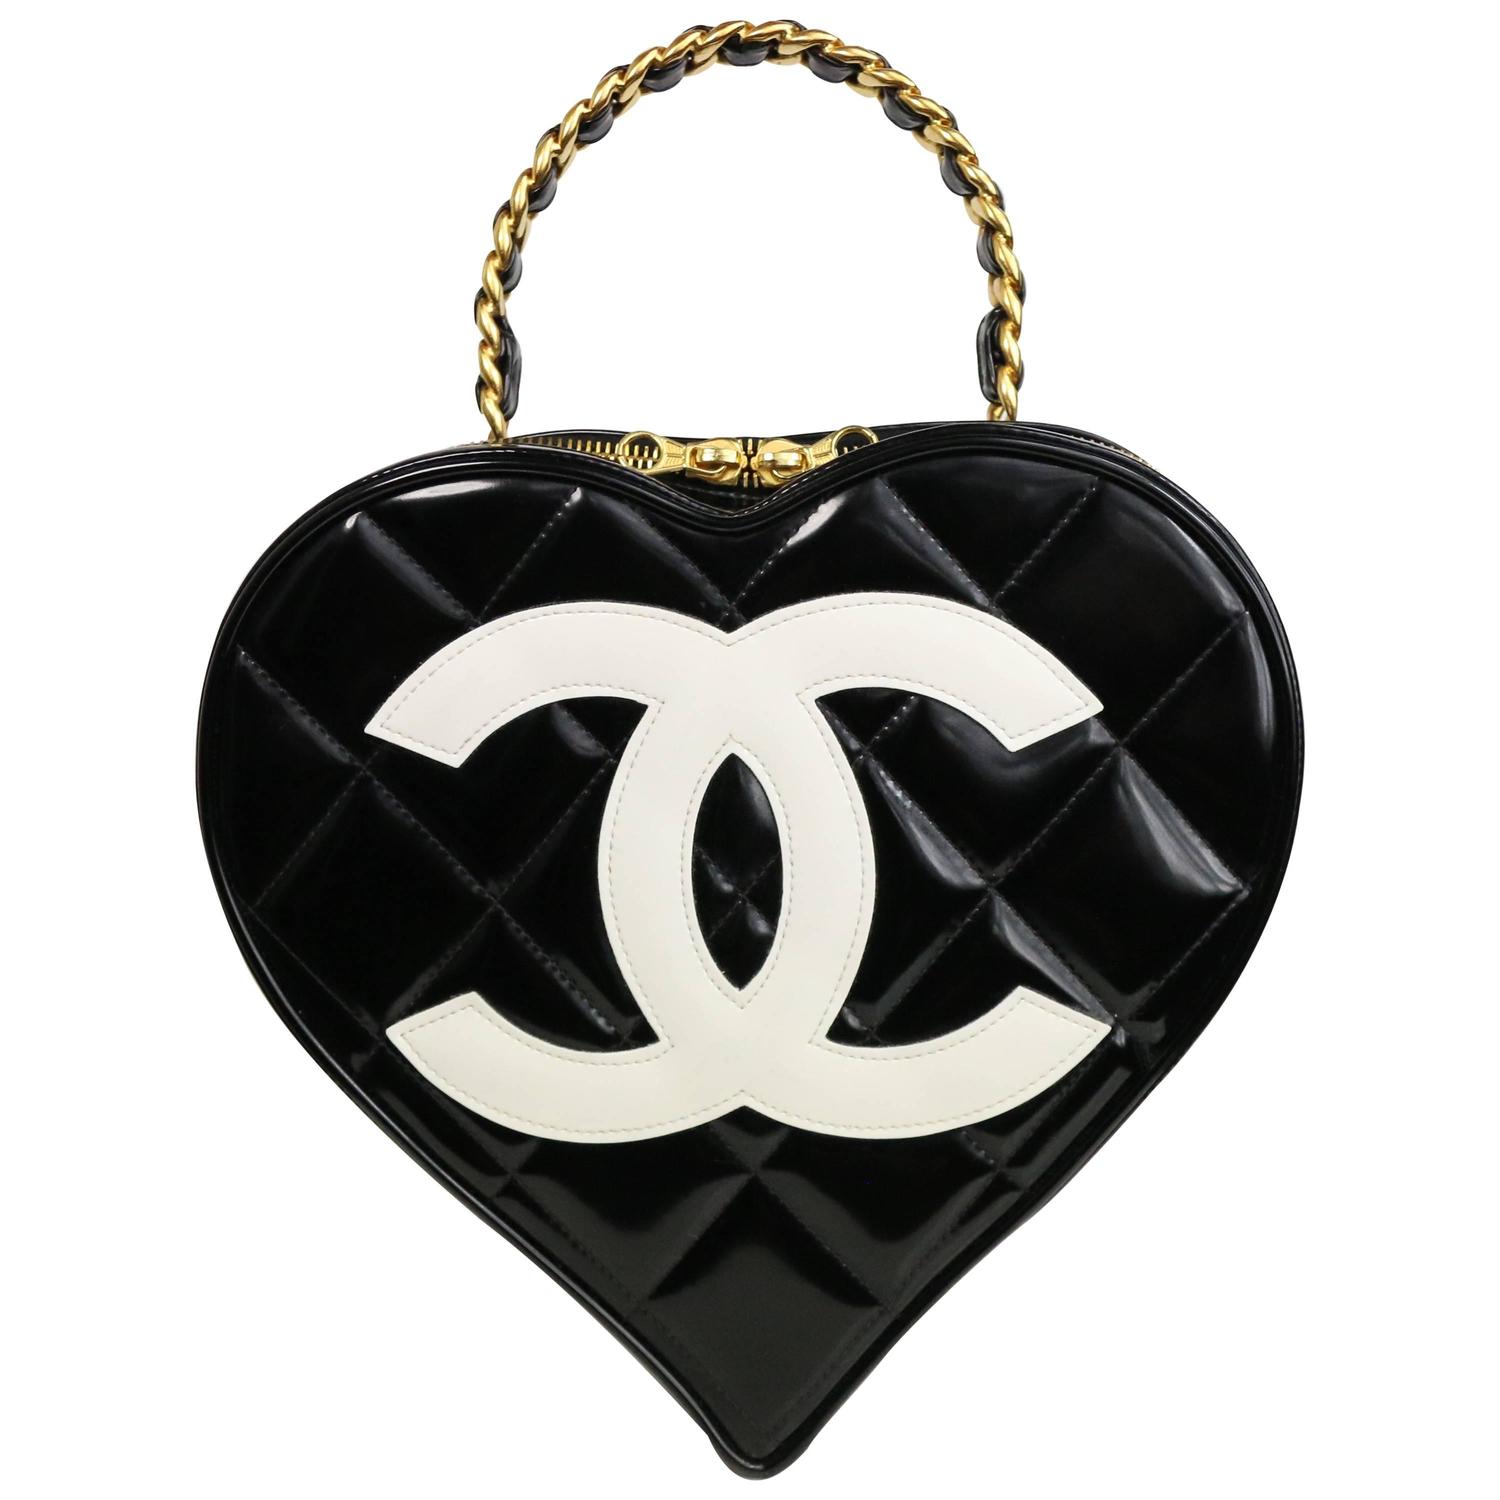 Chanel Black Patent Quilted Leather Heart-Shaped Vanity Chain Handbag For Sale at 1stdibs